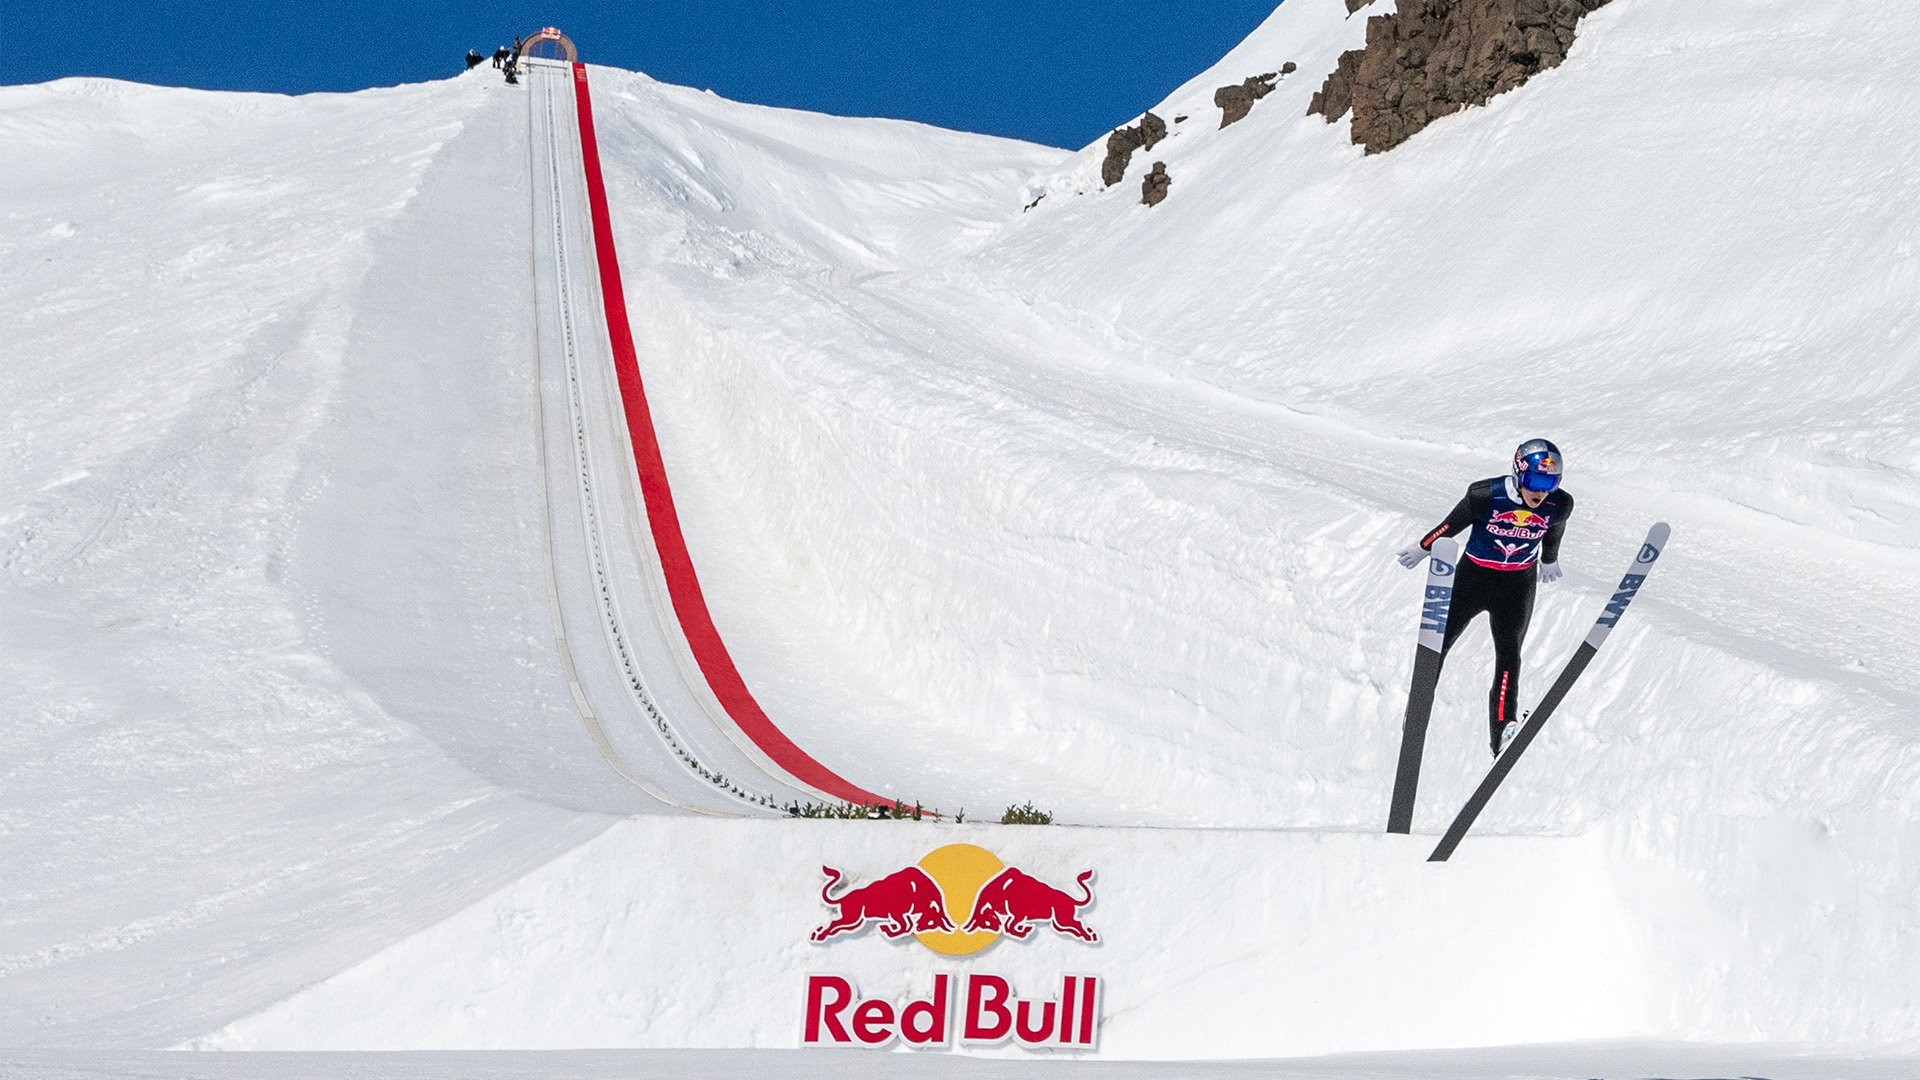 Skier mid-jump above a Red Bull banner on a snowy ramp